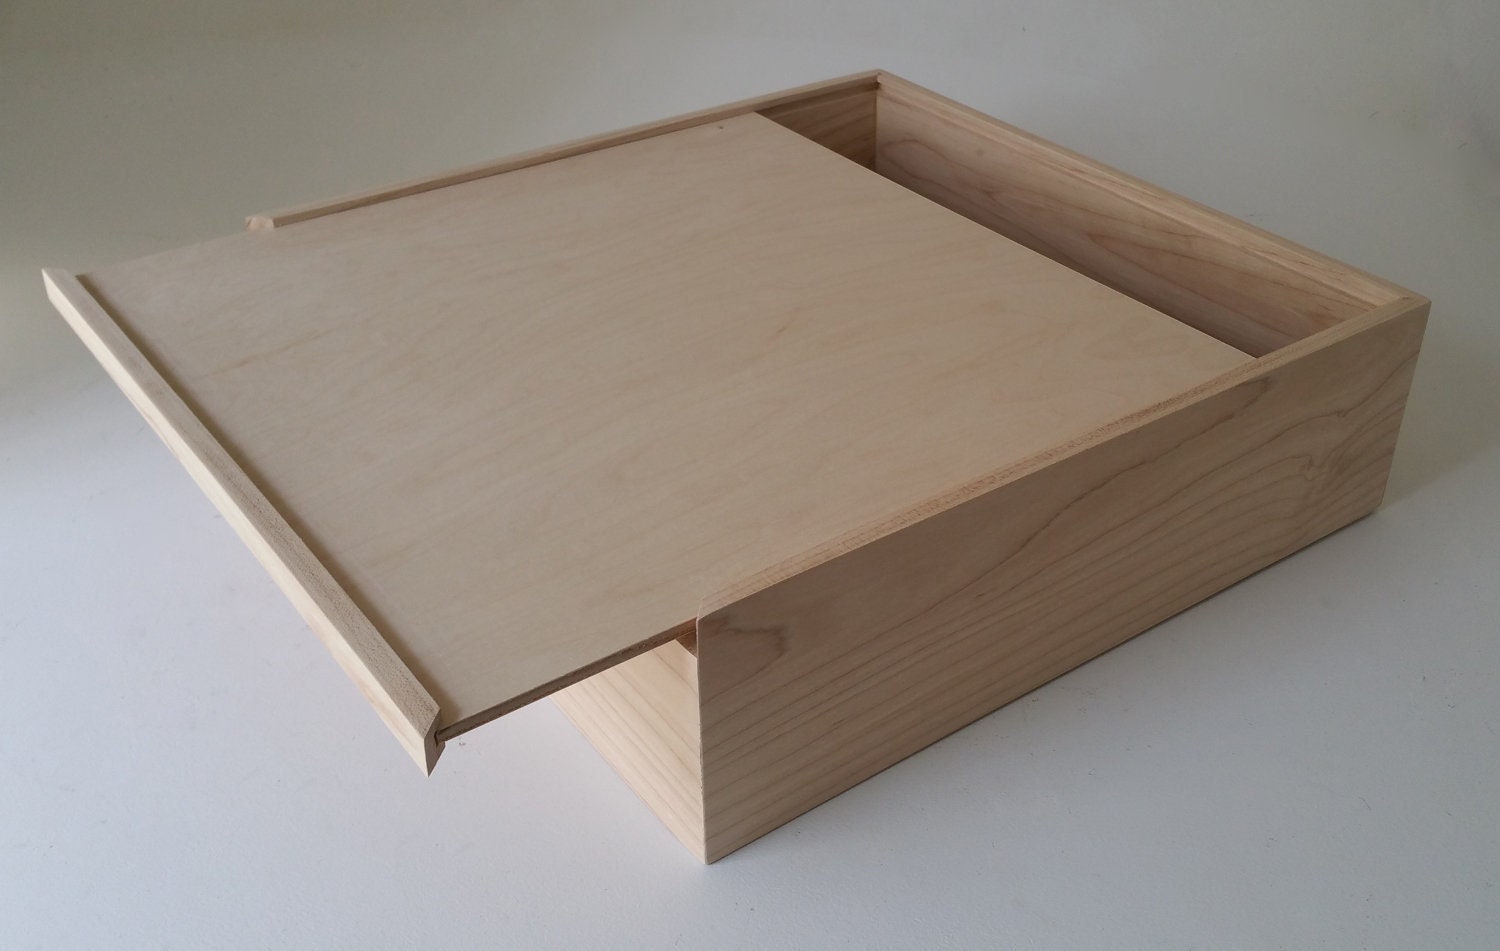 Unfinished Wood Storage Box with Sliding Lid Jewelry Box Gift - China  Wooden Box and Wooden Box Gift Ideas price